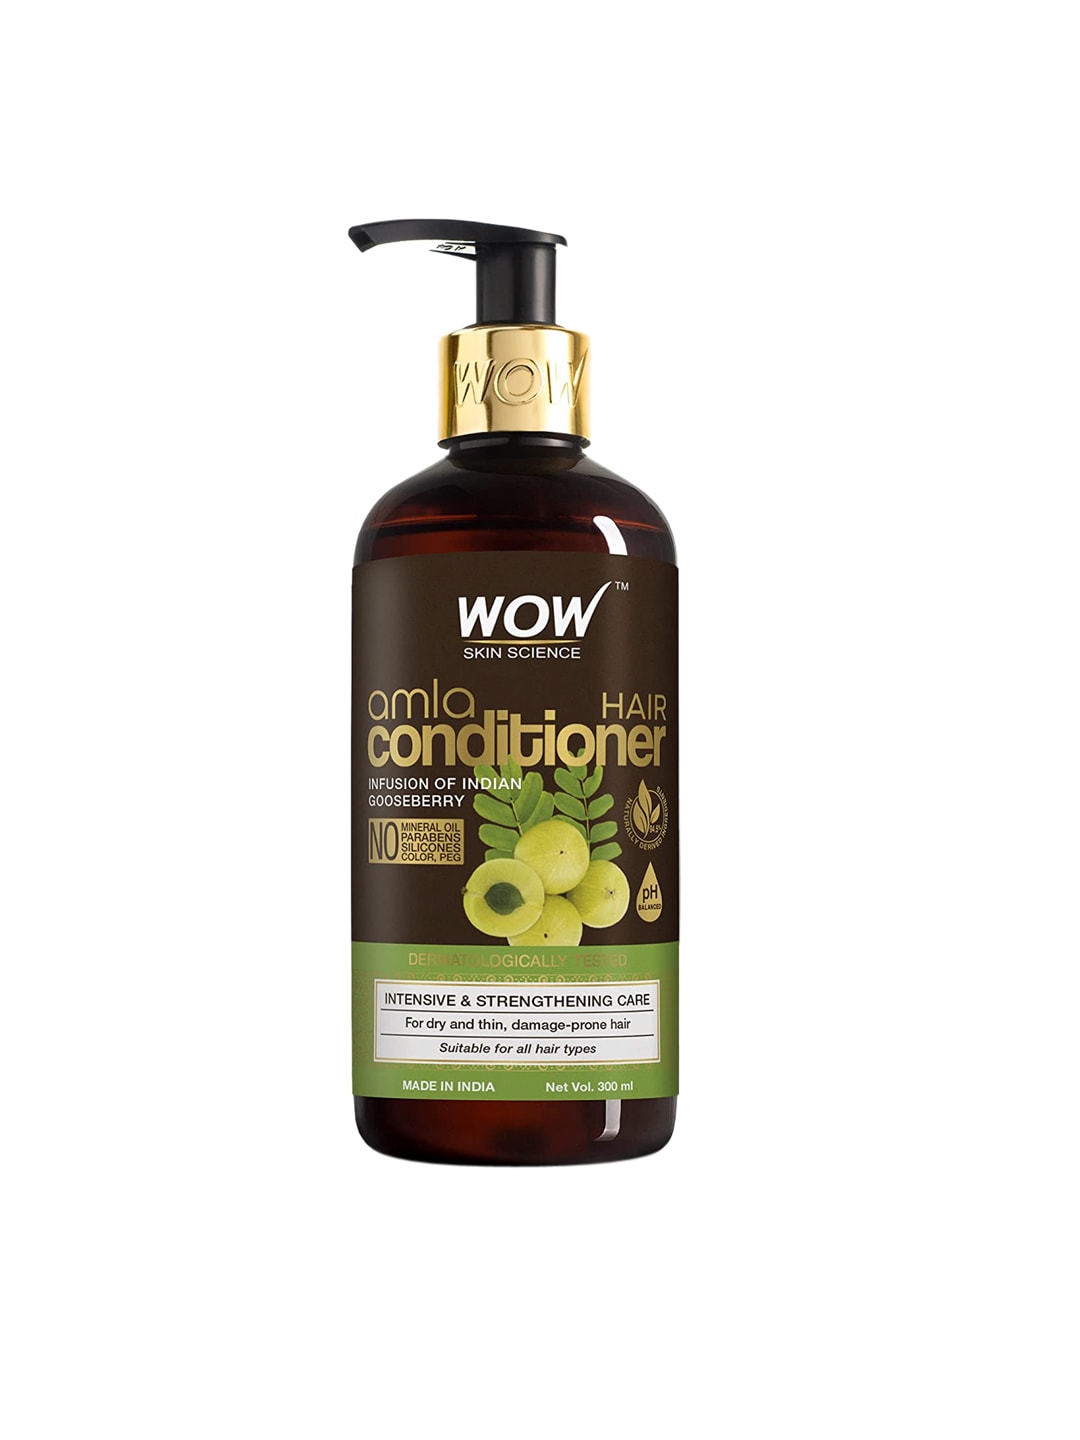 WOW SKIN SCIENCE Amla Hair Conditioner For Weak Hair  - 300ml Price in India